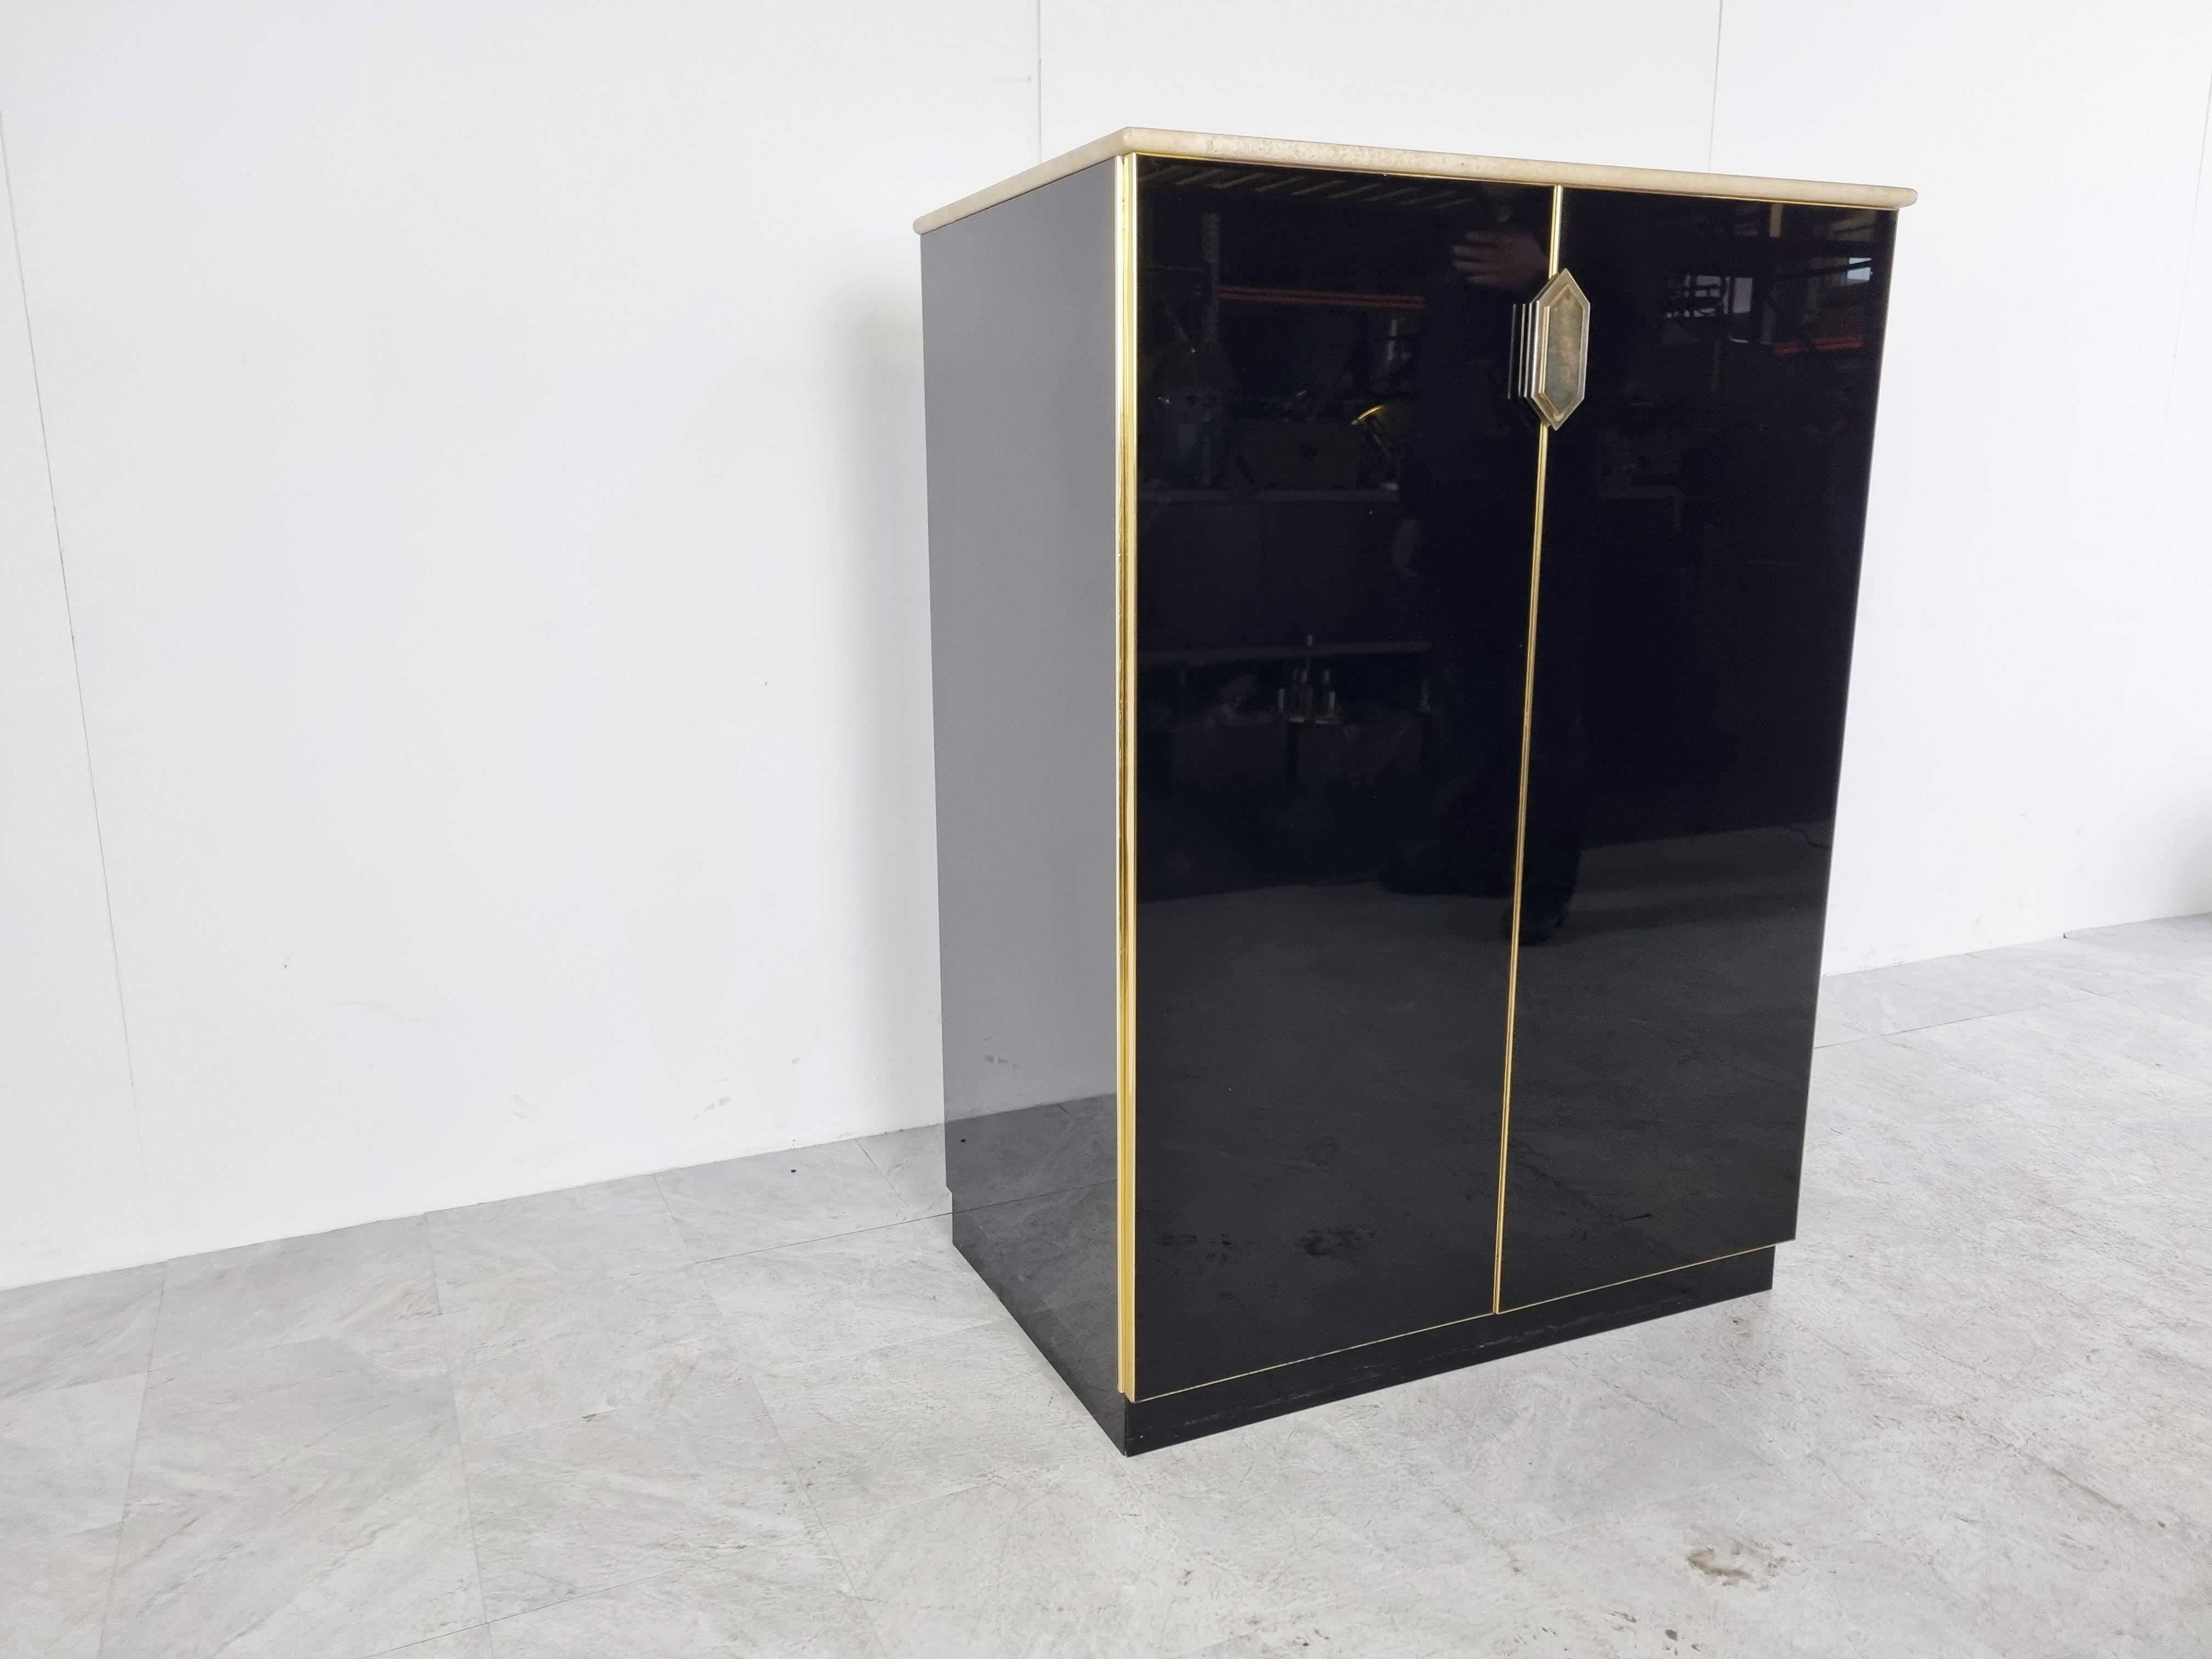 Hollywood regency black glass and brass bar cabinet with a beautiful travertine stone top.

It features 2 doors with a nicely shaped door handle and two shelves - Plenty of storage space for glasses and bottles. 

This pieces gives a great touch